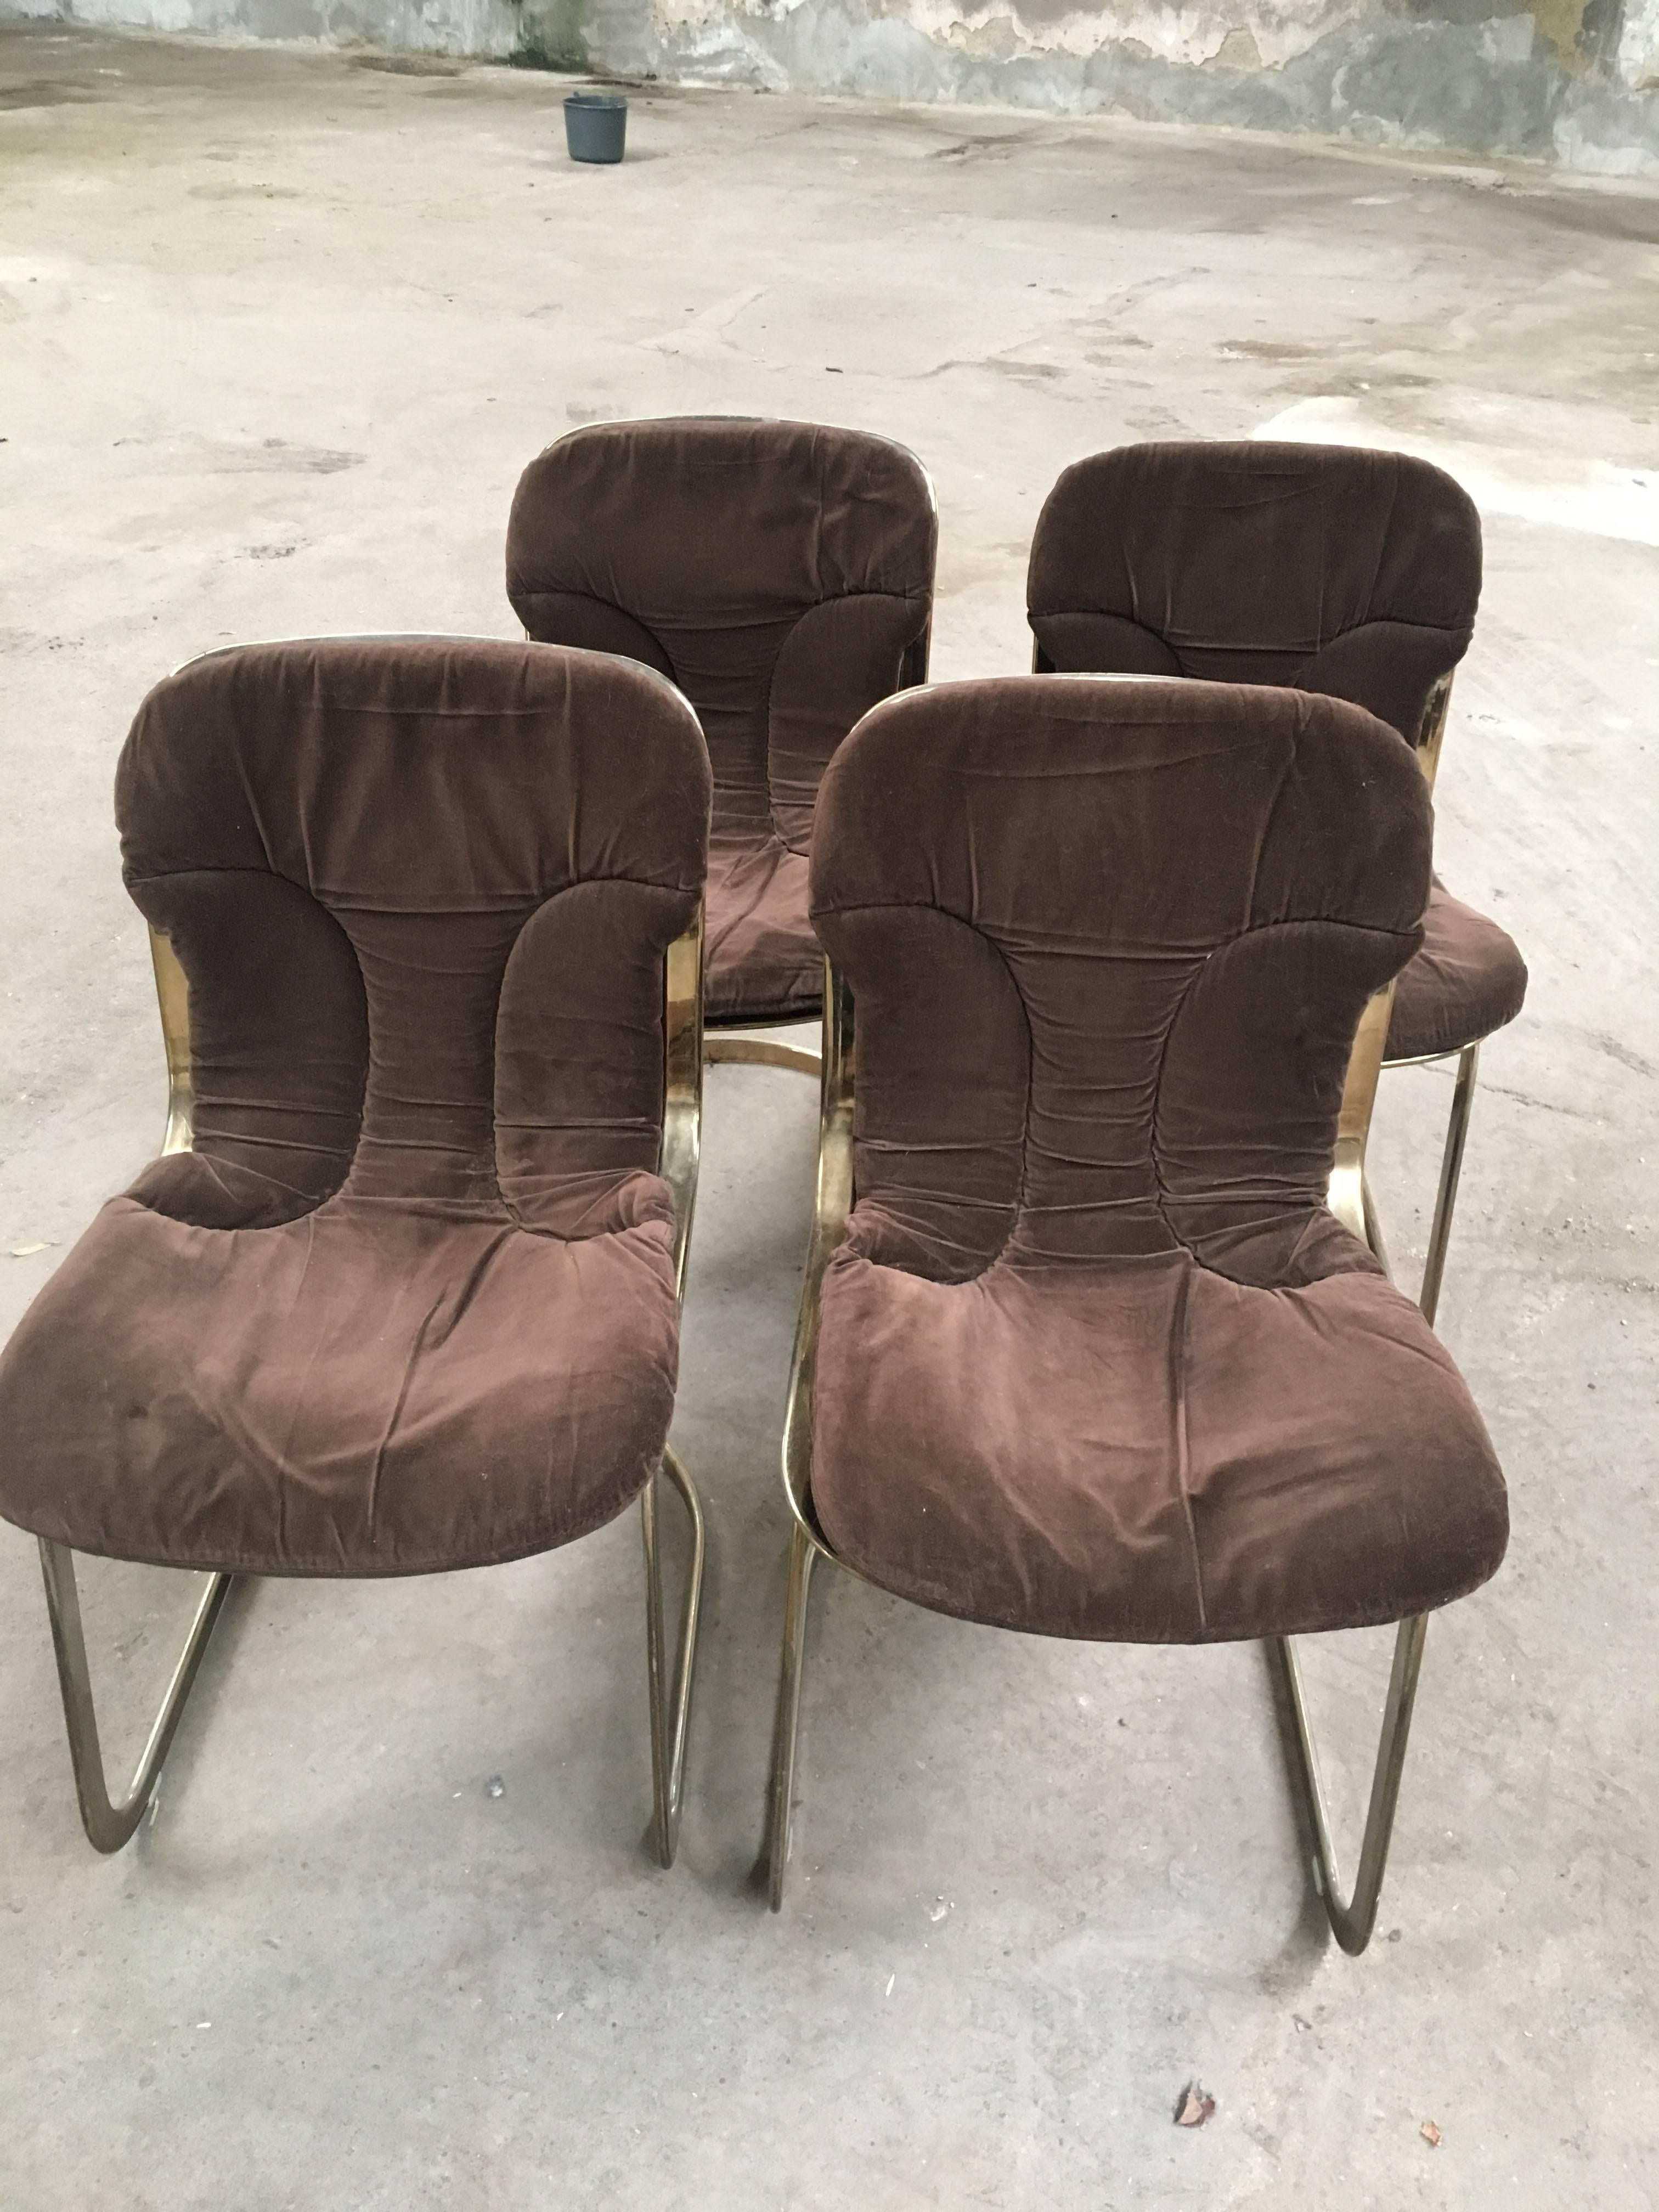 Italian set of four Cidue gilt metal chairs by Willy Rizzo with original cushions from 1970s.